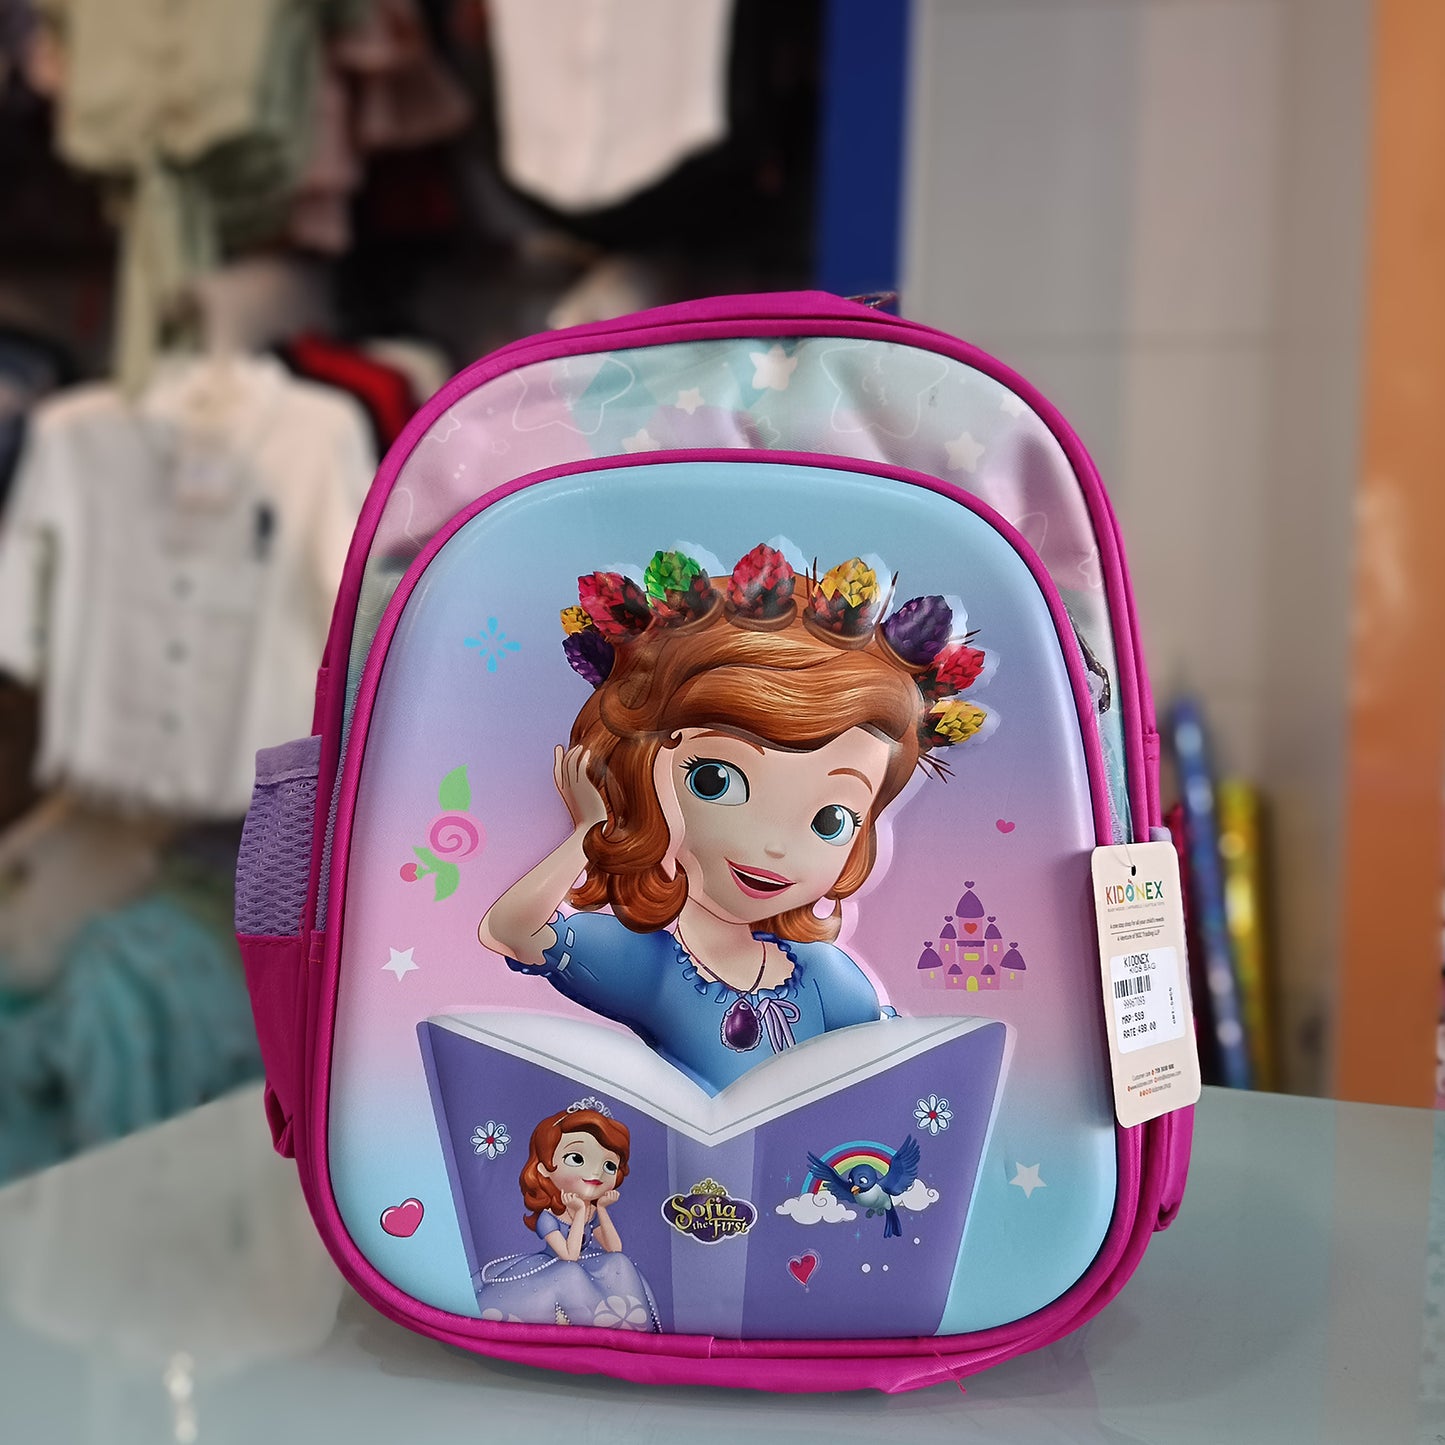 School Backpack for Kids Waterproof Sofia the first School Bag for Girls Large Capacity Kids School Backpacks for Picnic, Tuition, Travel, Camping, Burden-relief Bag for Kids